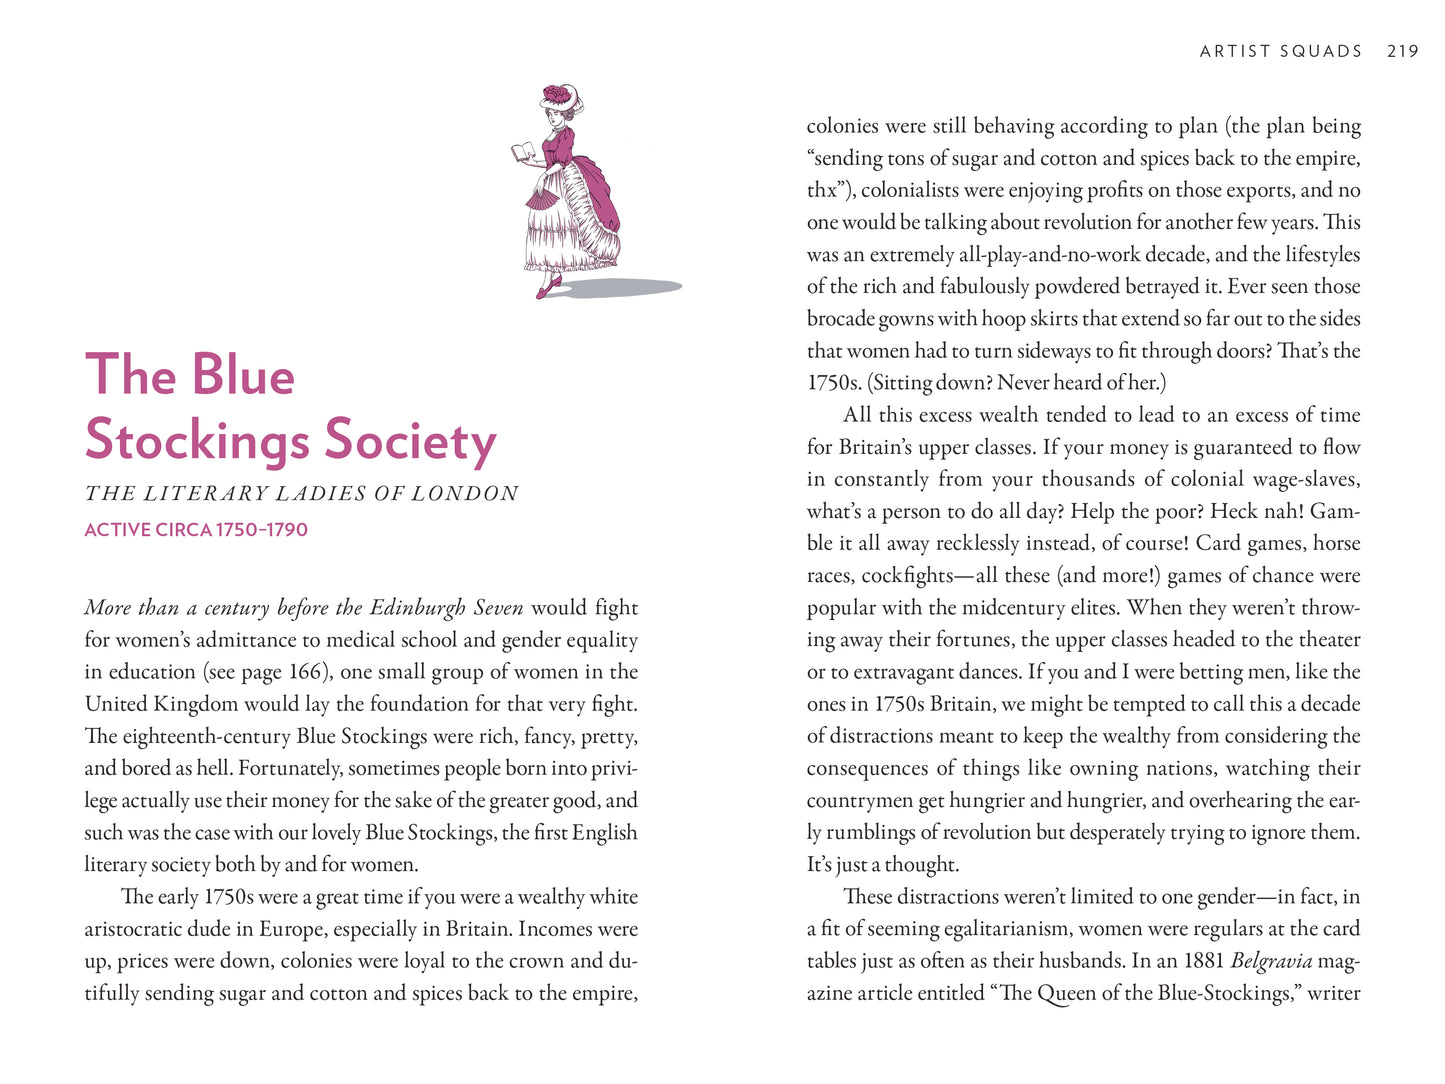 First two pages of "The Blue Stockings Society."